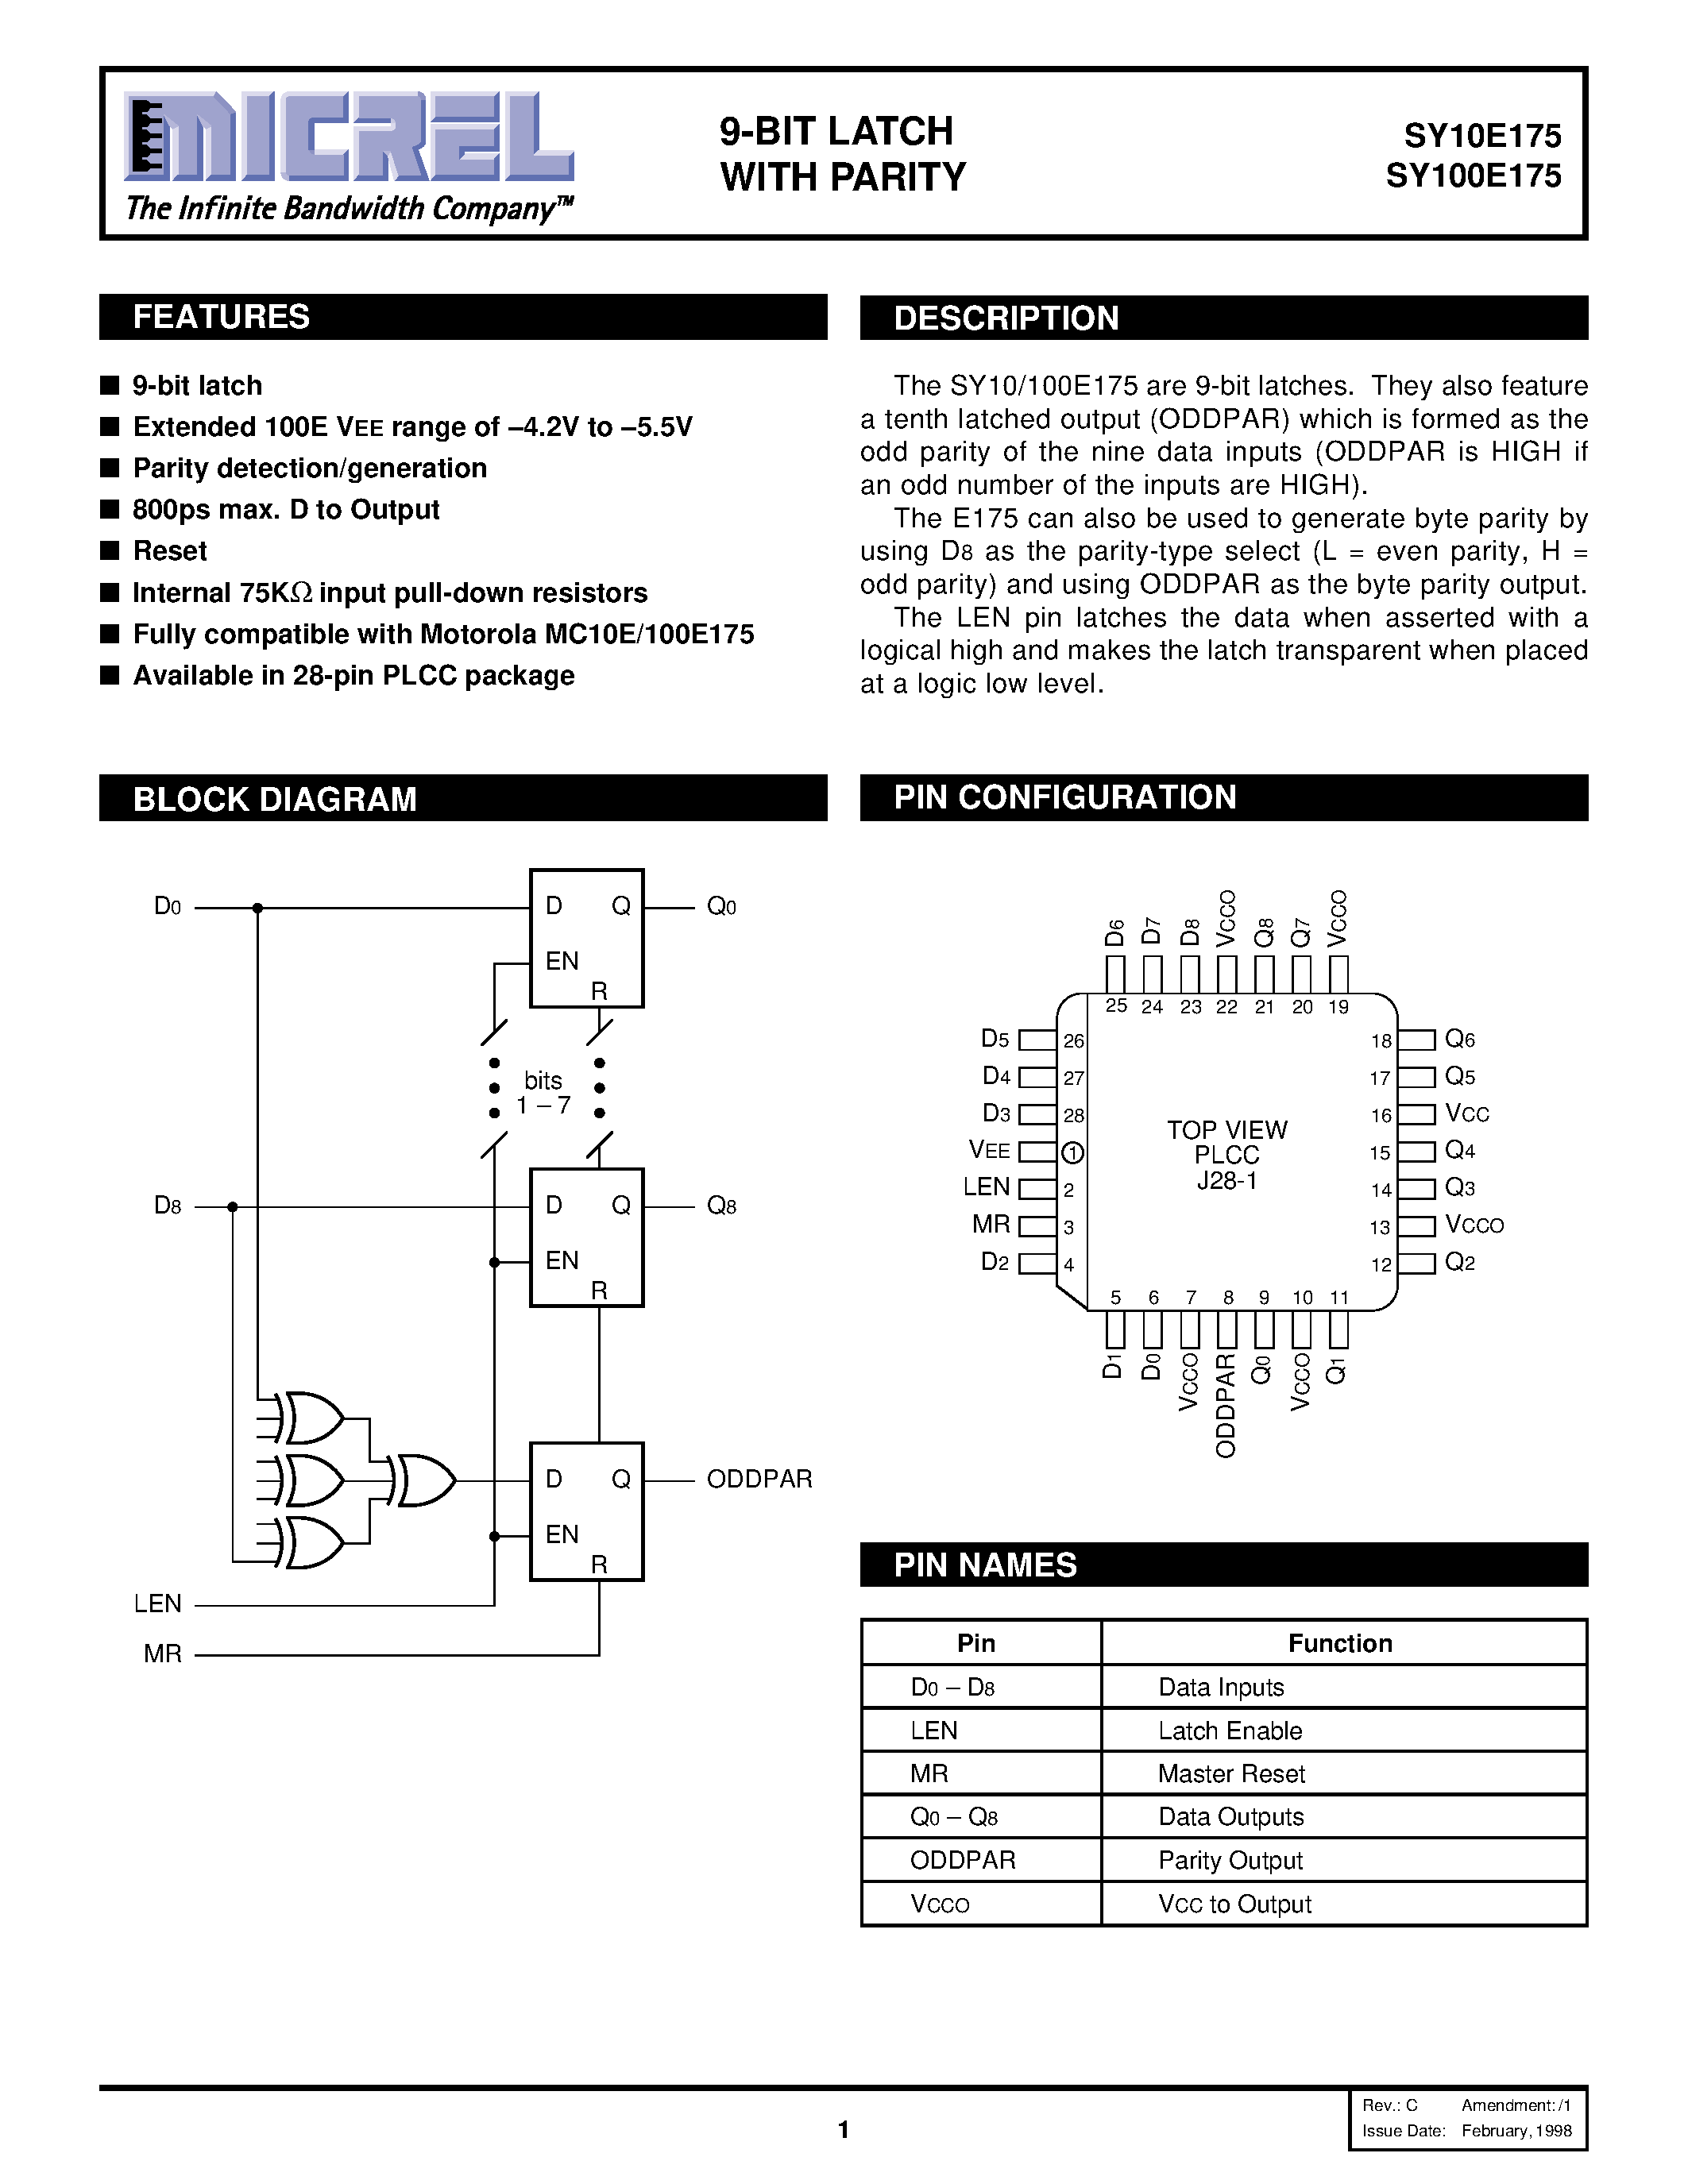 Datasheet SY100E175 - 9-BIT LATCH WITH PARITY page 1